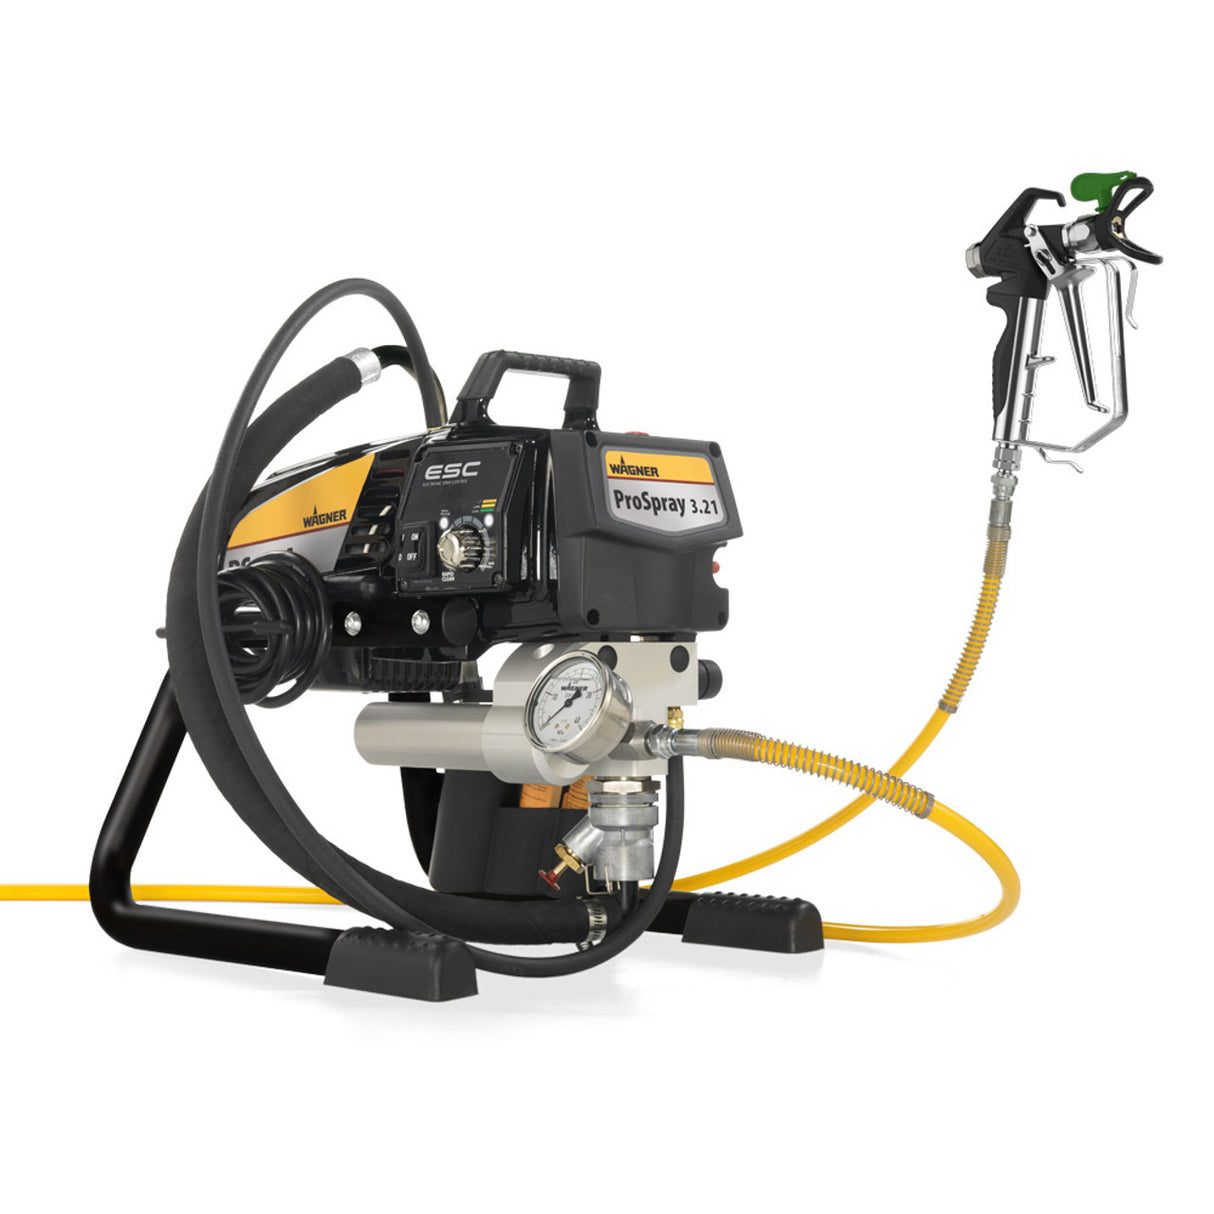 PS 3.25 Wagner Airless Paint Sprayer, Max Flow: 3 Lpm, Automation